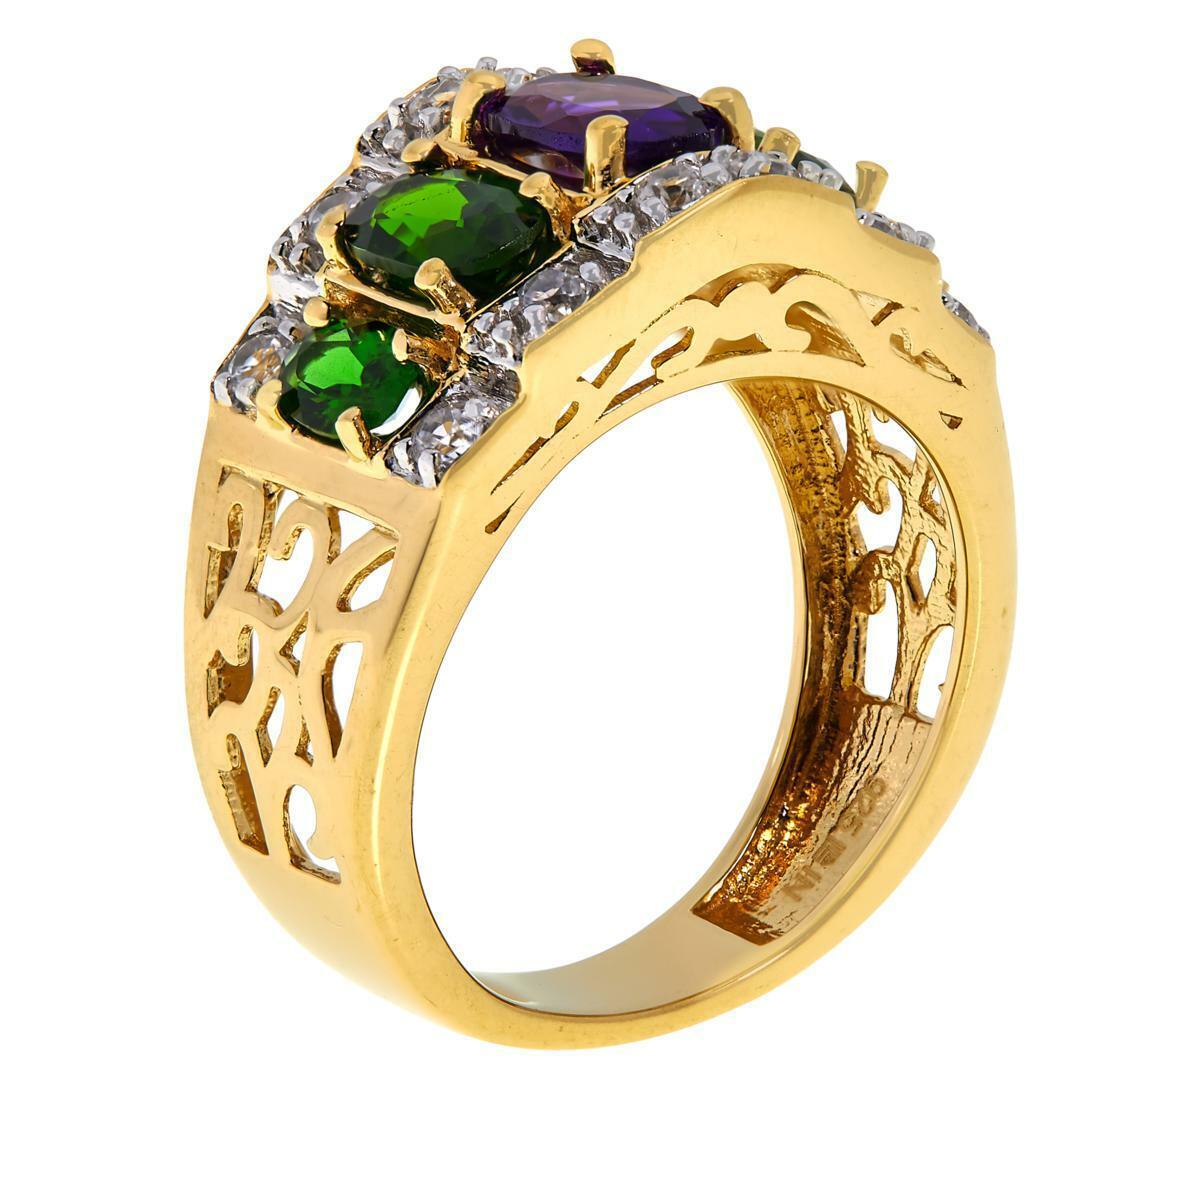 Colleen Lopez Gold-Plated Amethyst, Chrome Diopside and Zircon Ring, Size 7